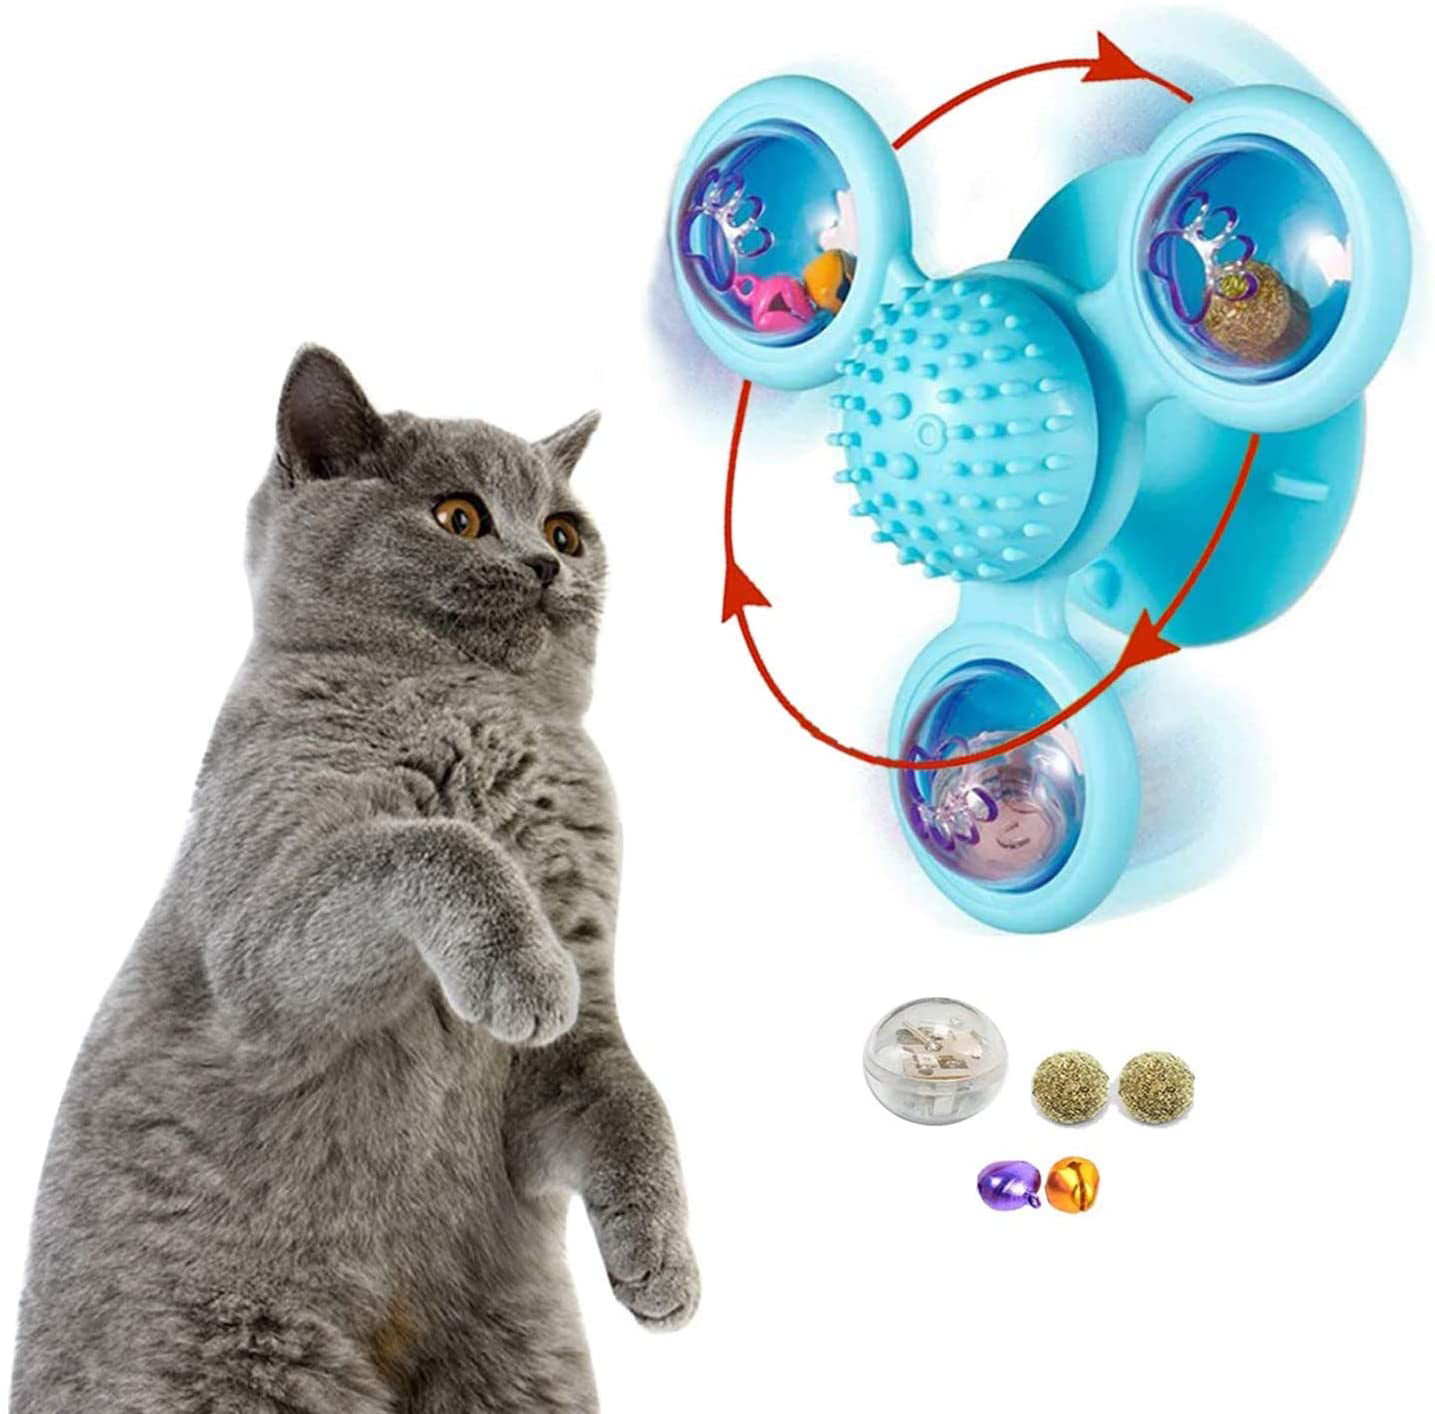 Nincee Cat Interaction Spinner Toy,LED Flash Light Creative Transparent Windmill Turntable Cat Molar/Massage Toy Yellow